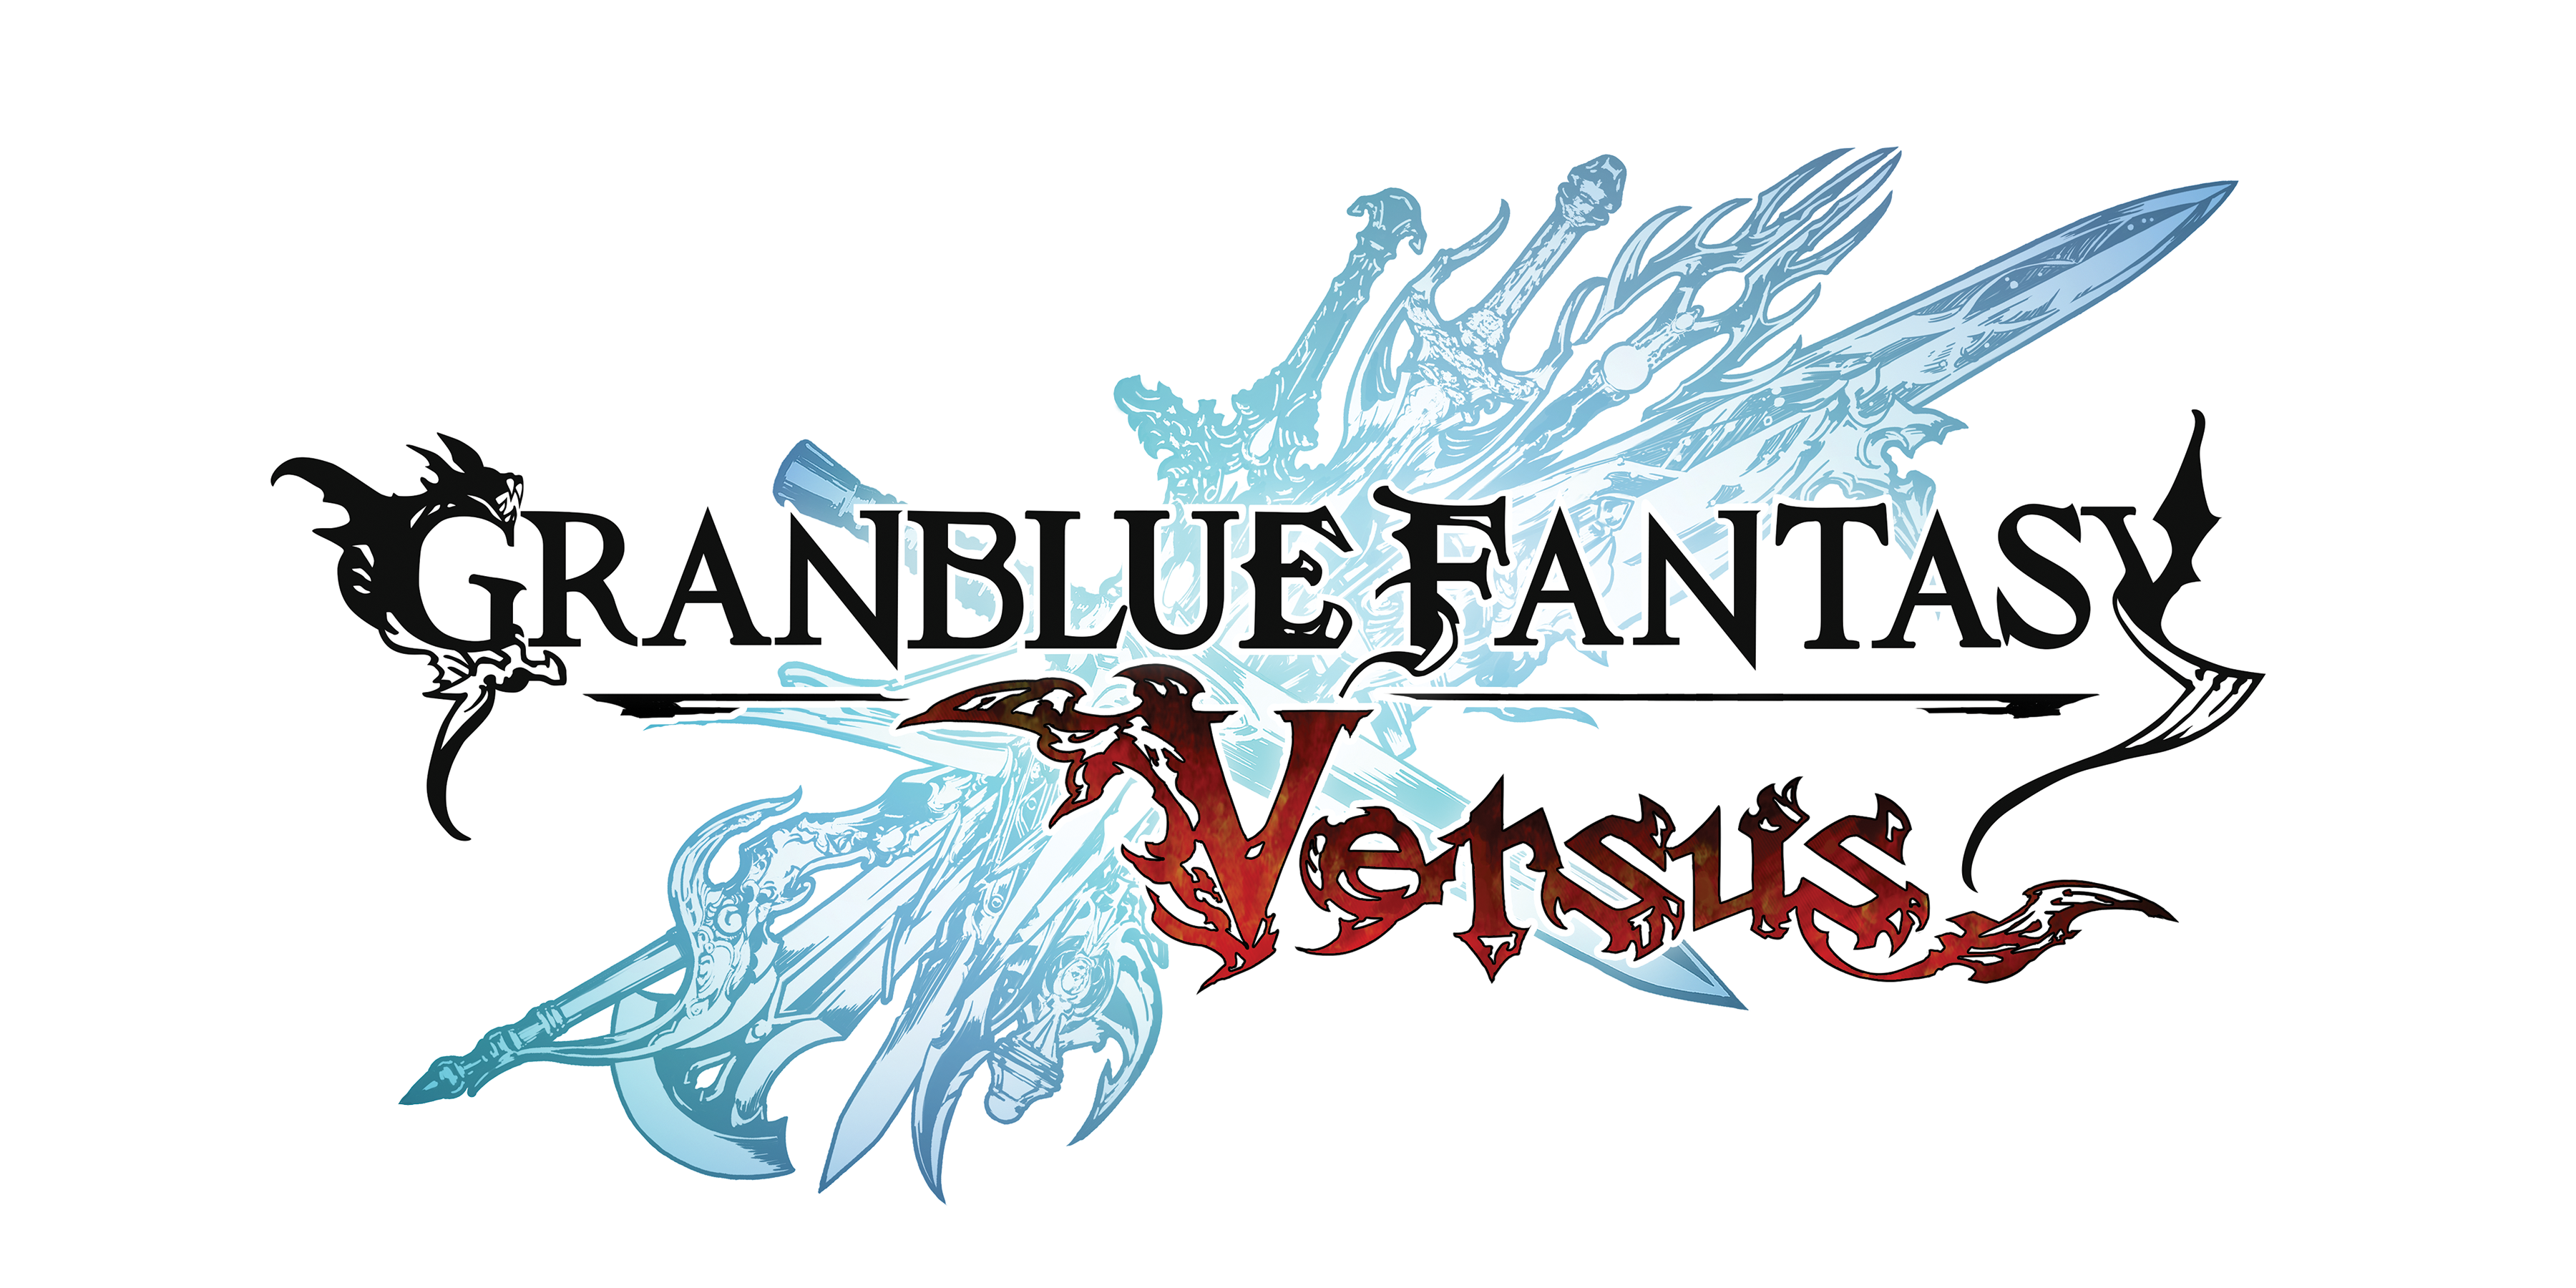 Final boss and upcoming DLC announced for Granblue Fantasy: Versus